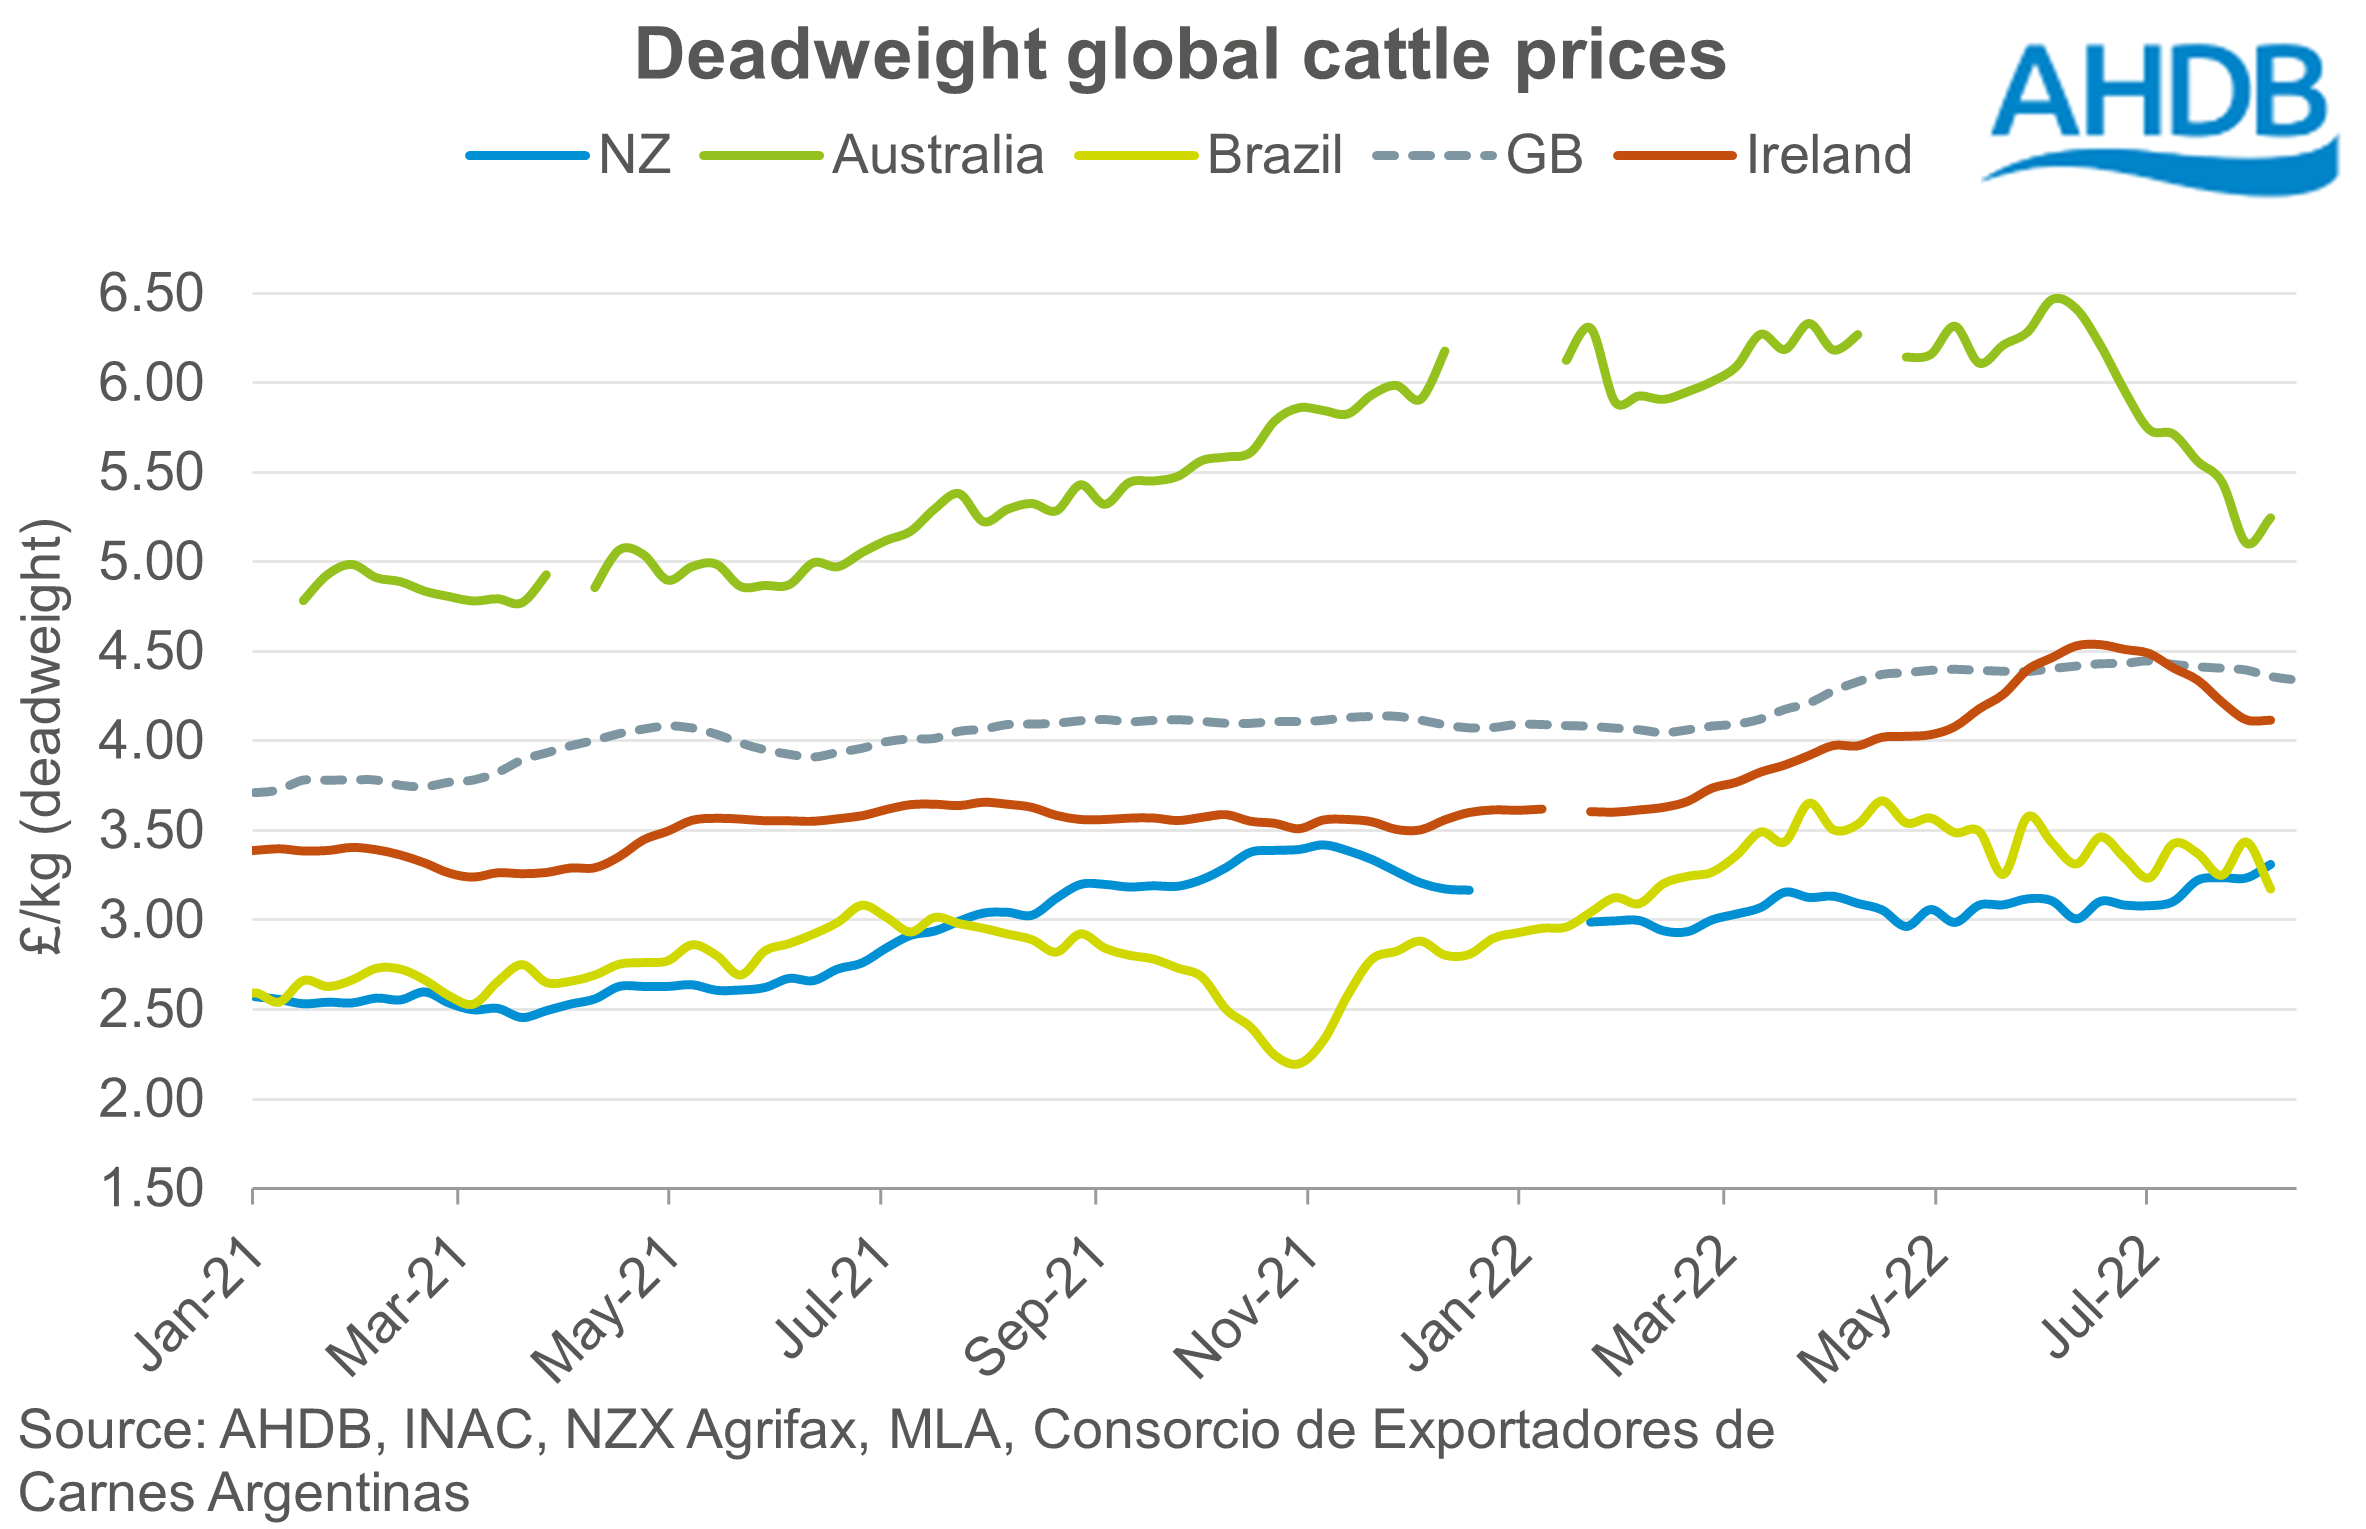 Graph showing weekly deadweight global cattle prices in GBP 